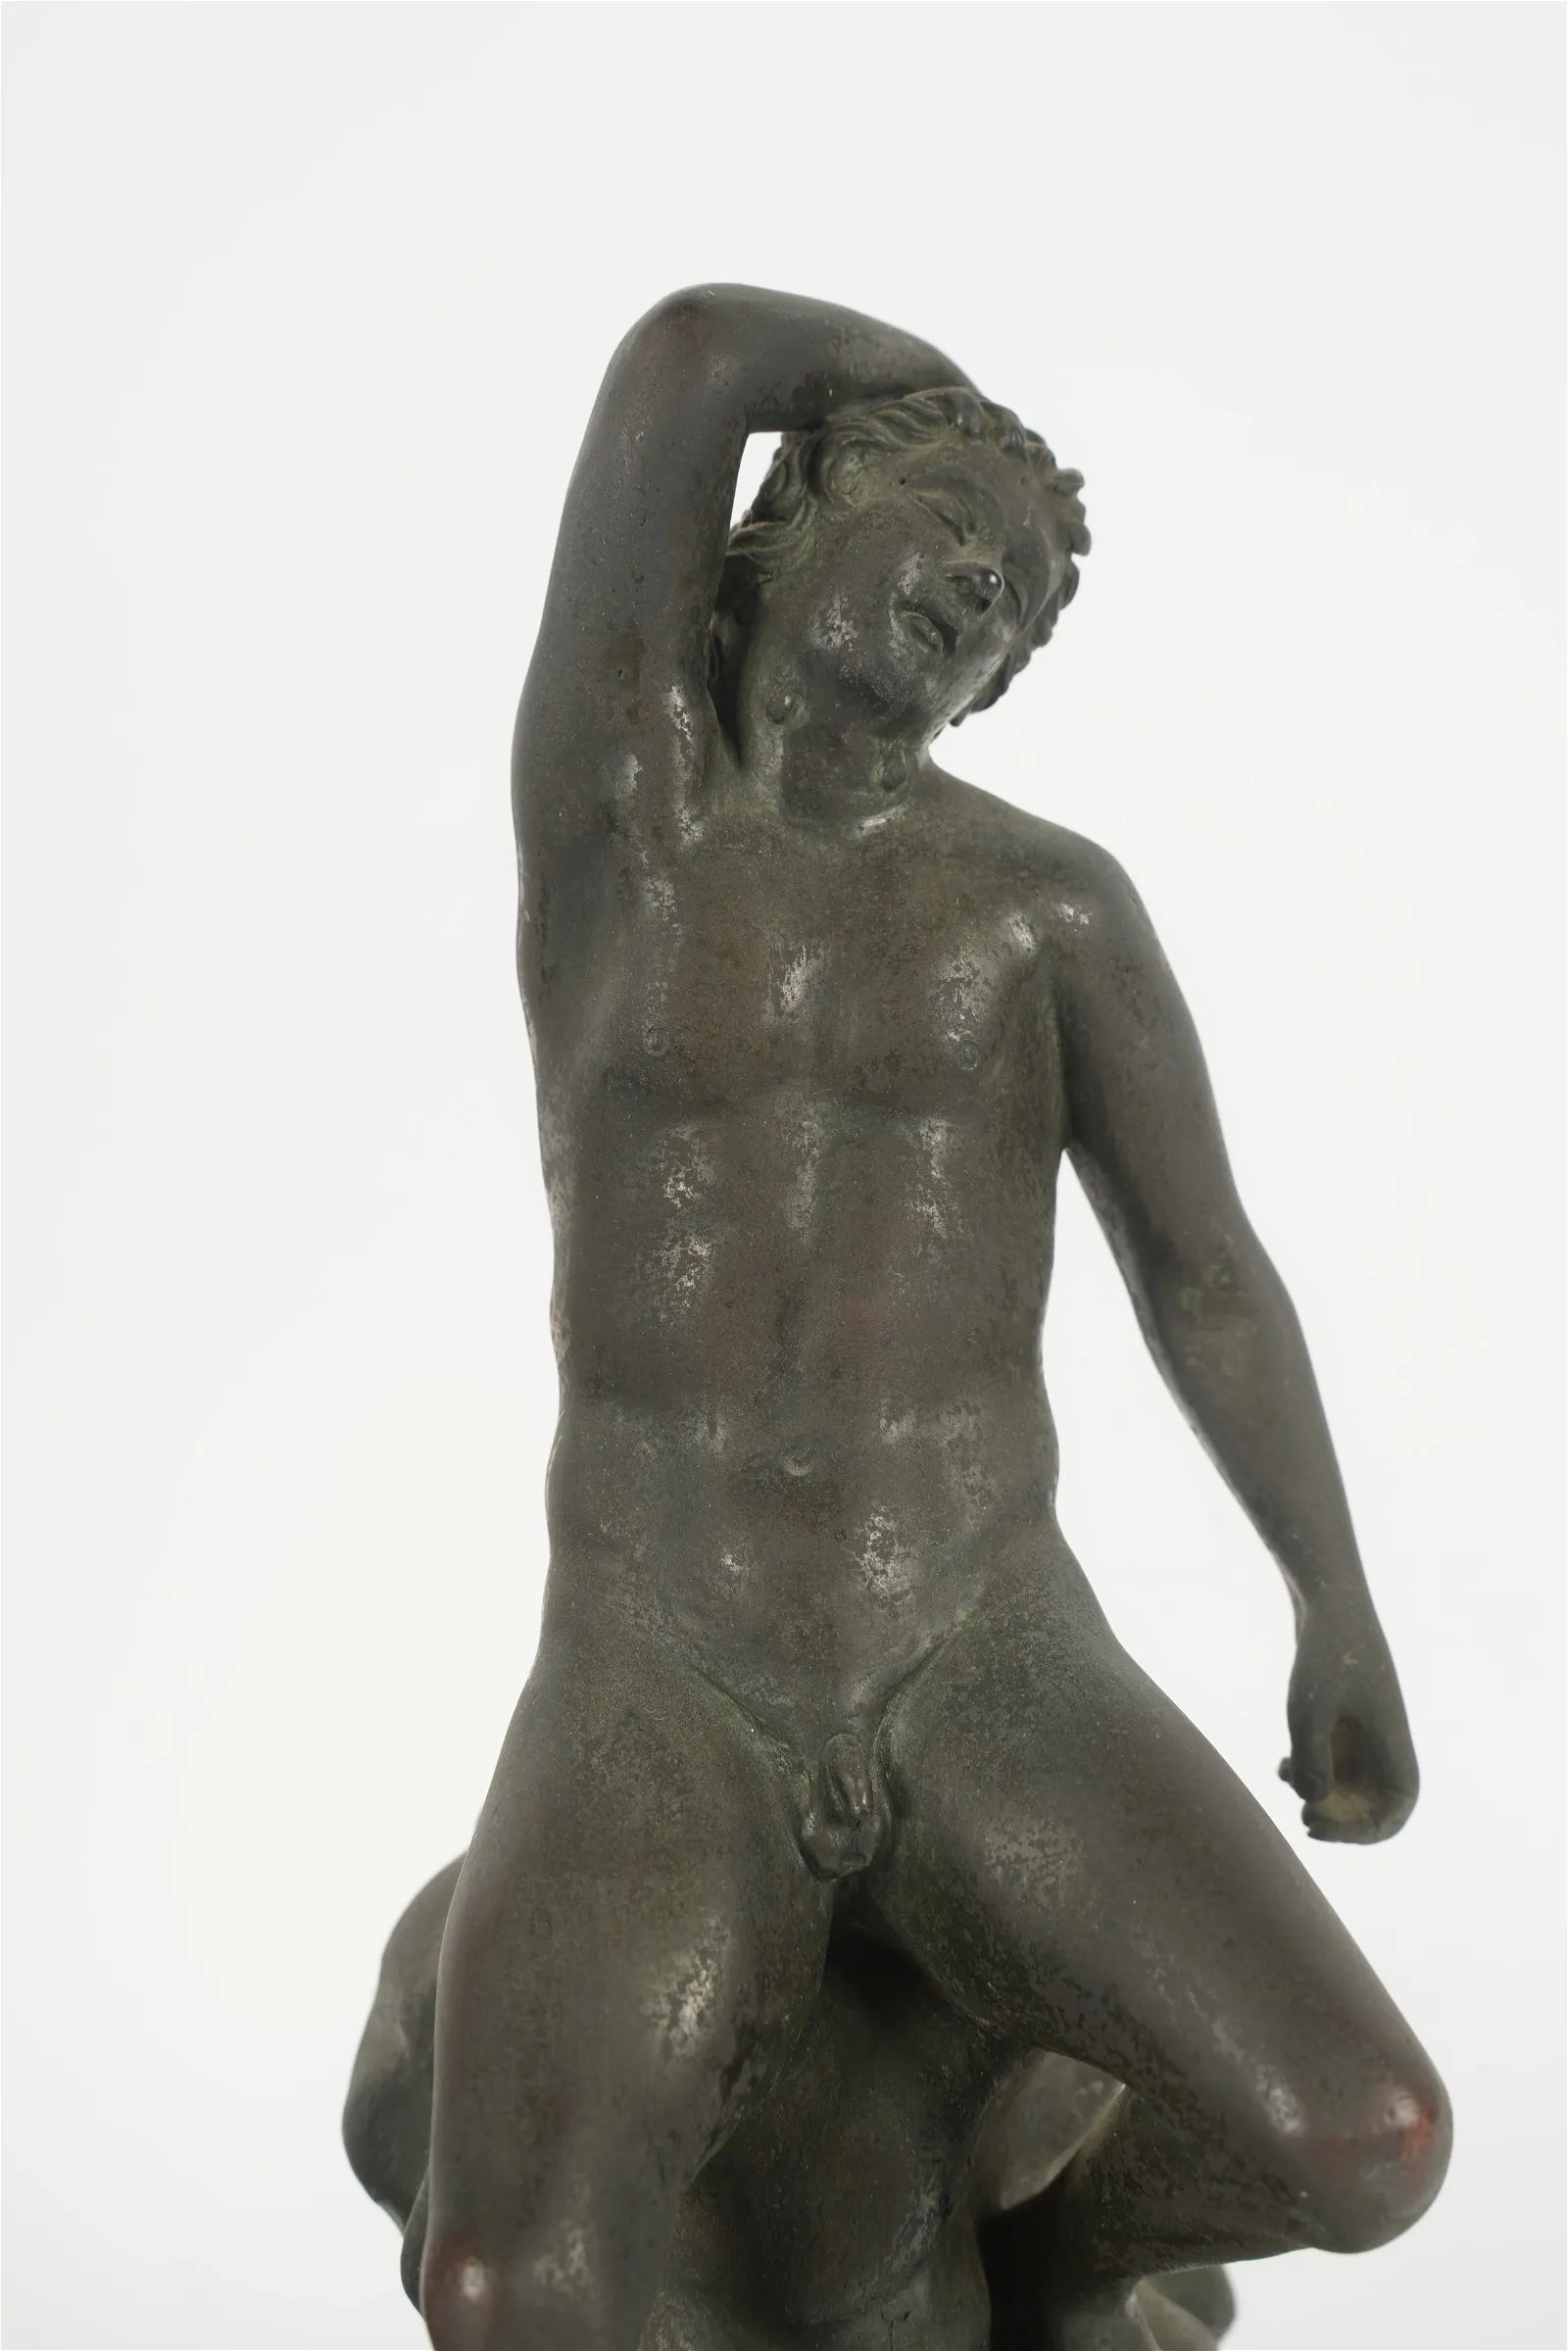 AW11-022: Late 19th Century Grand Tour Patinated Bronze Figure of Sleeping Faun After Antiquity From Villa of the Papyri, Herculaum National Archaeological Museum, Napoli